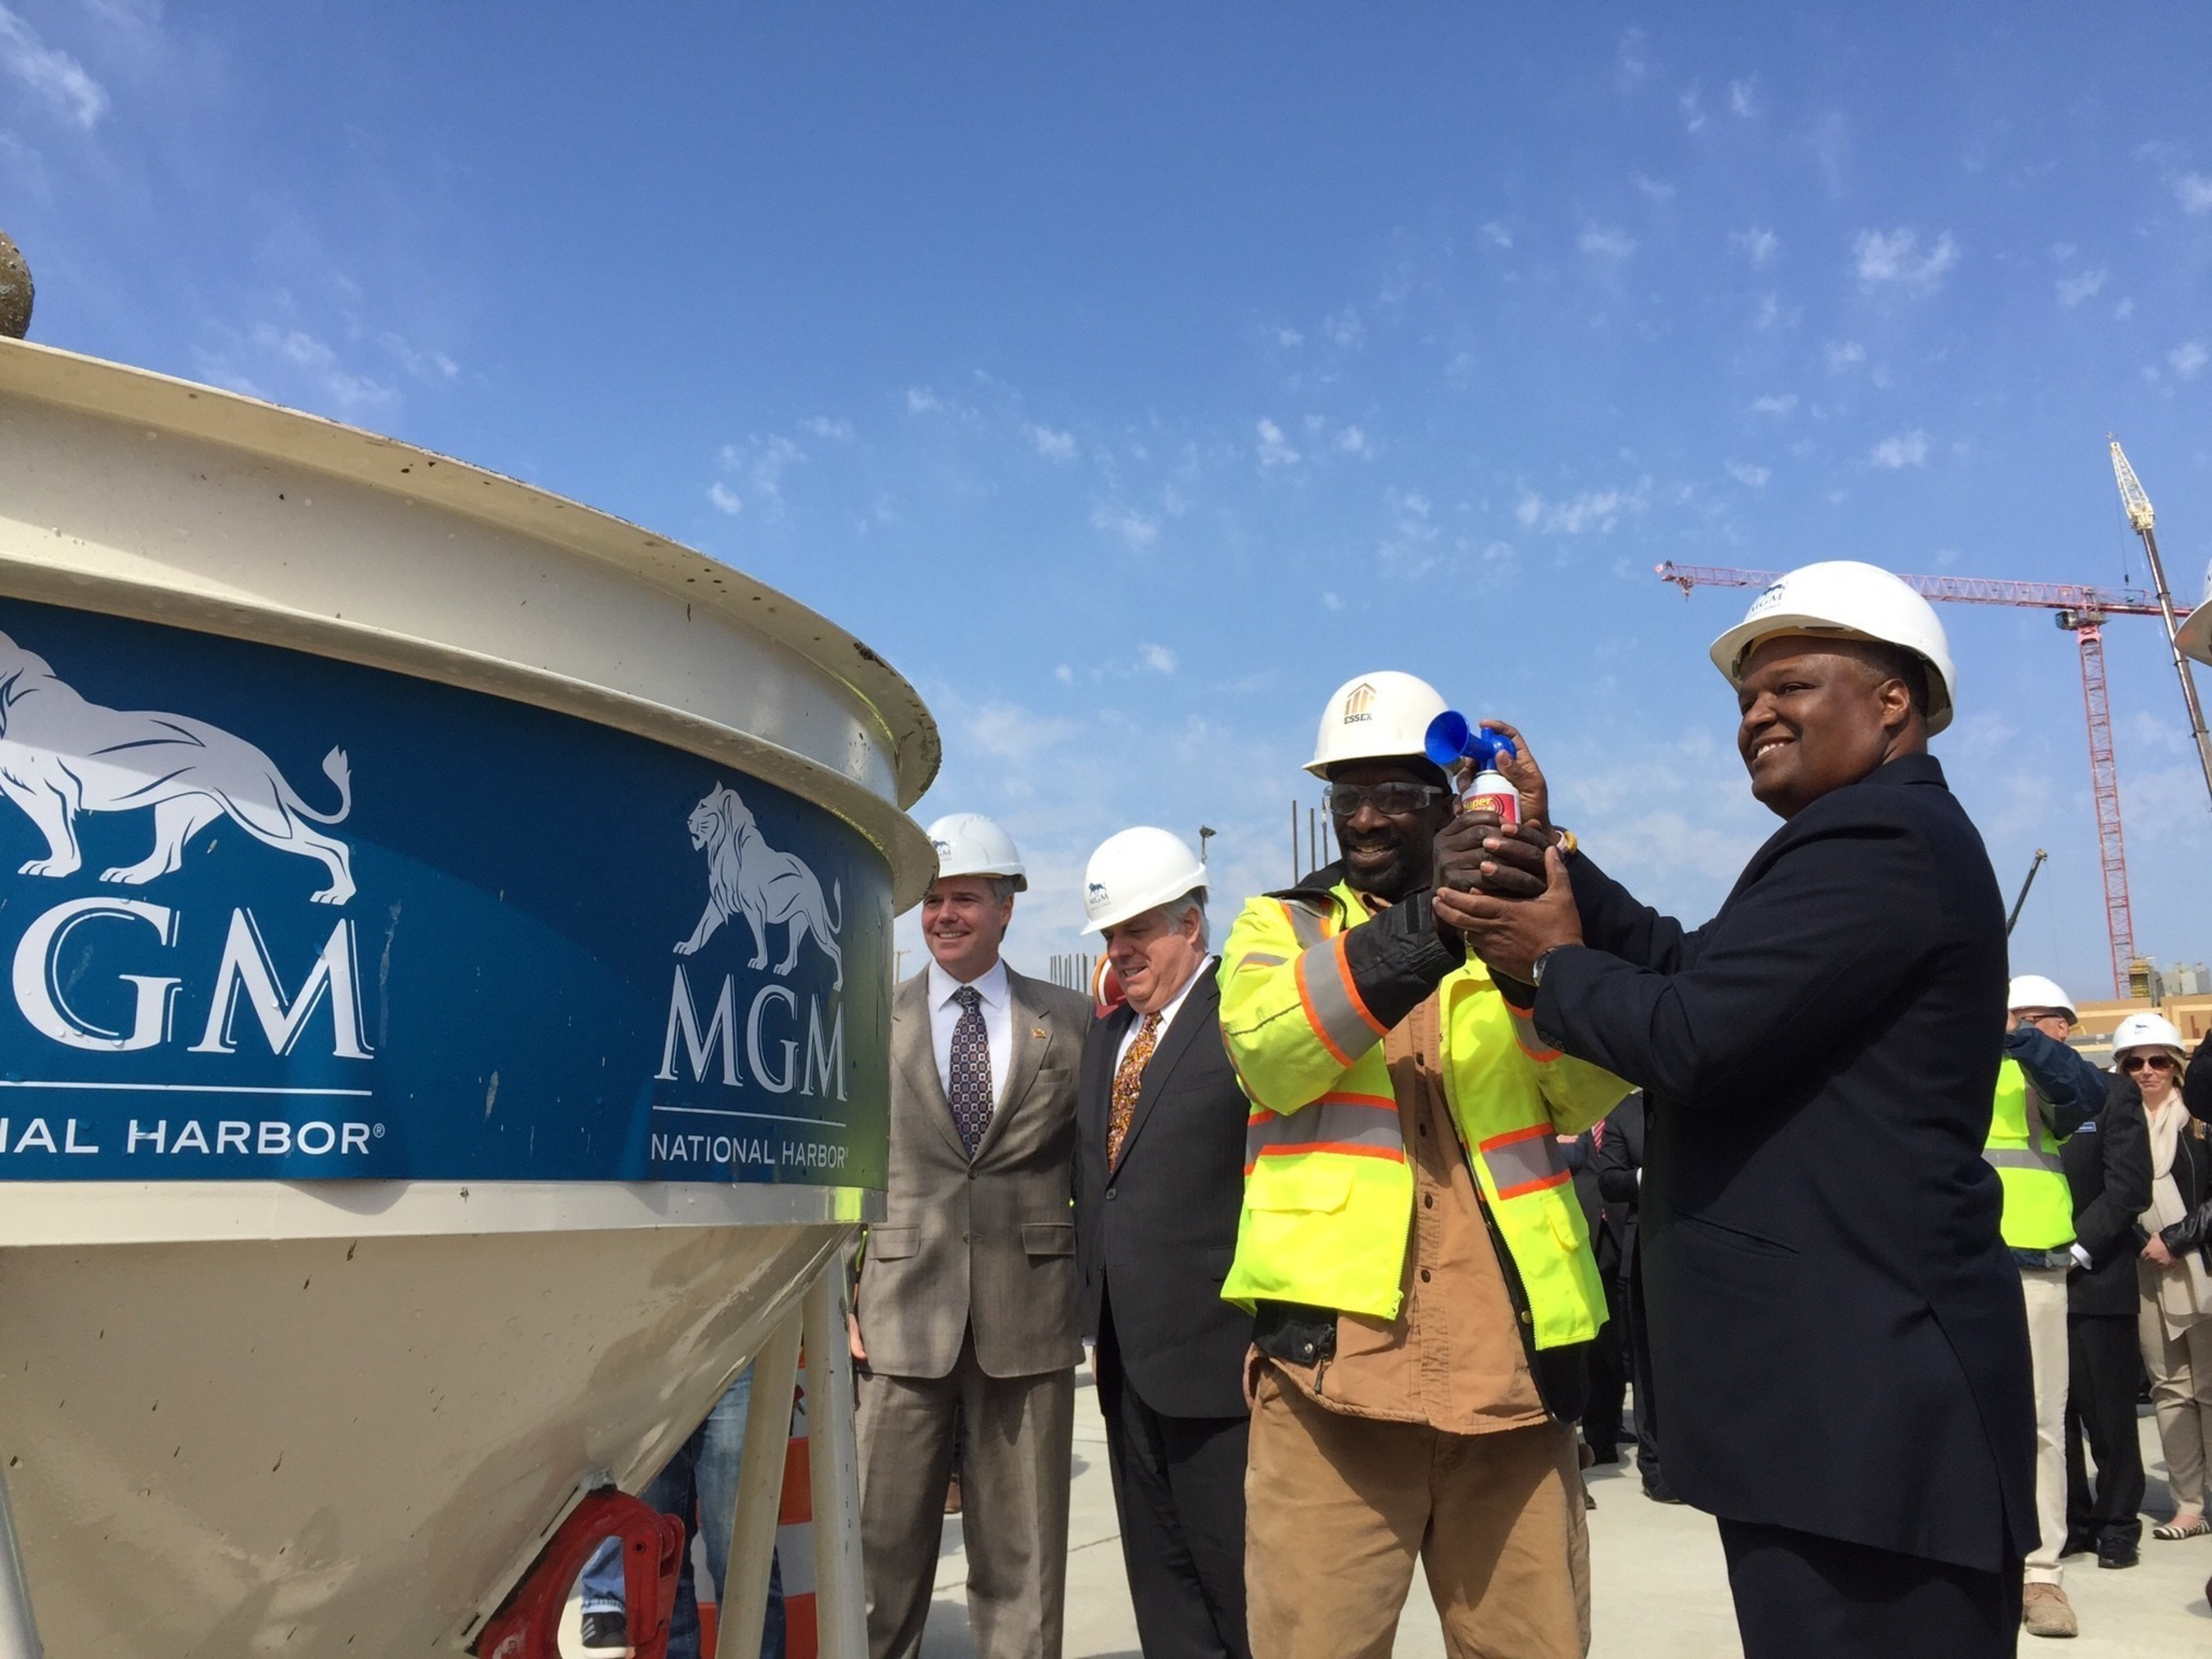 MGM National Harbor celebrates the hiring of the resort's 1000th construction employee with (Left to right) MGM Resorts International Chairman and CEO Jim Murren, Maryland Governor Larry Hogan, Essex Construction Labor Foreman Thomas Turner and Rushern Baker, County Executive of Prince George's County, MD.